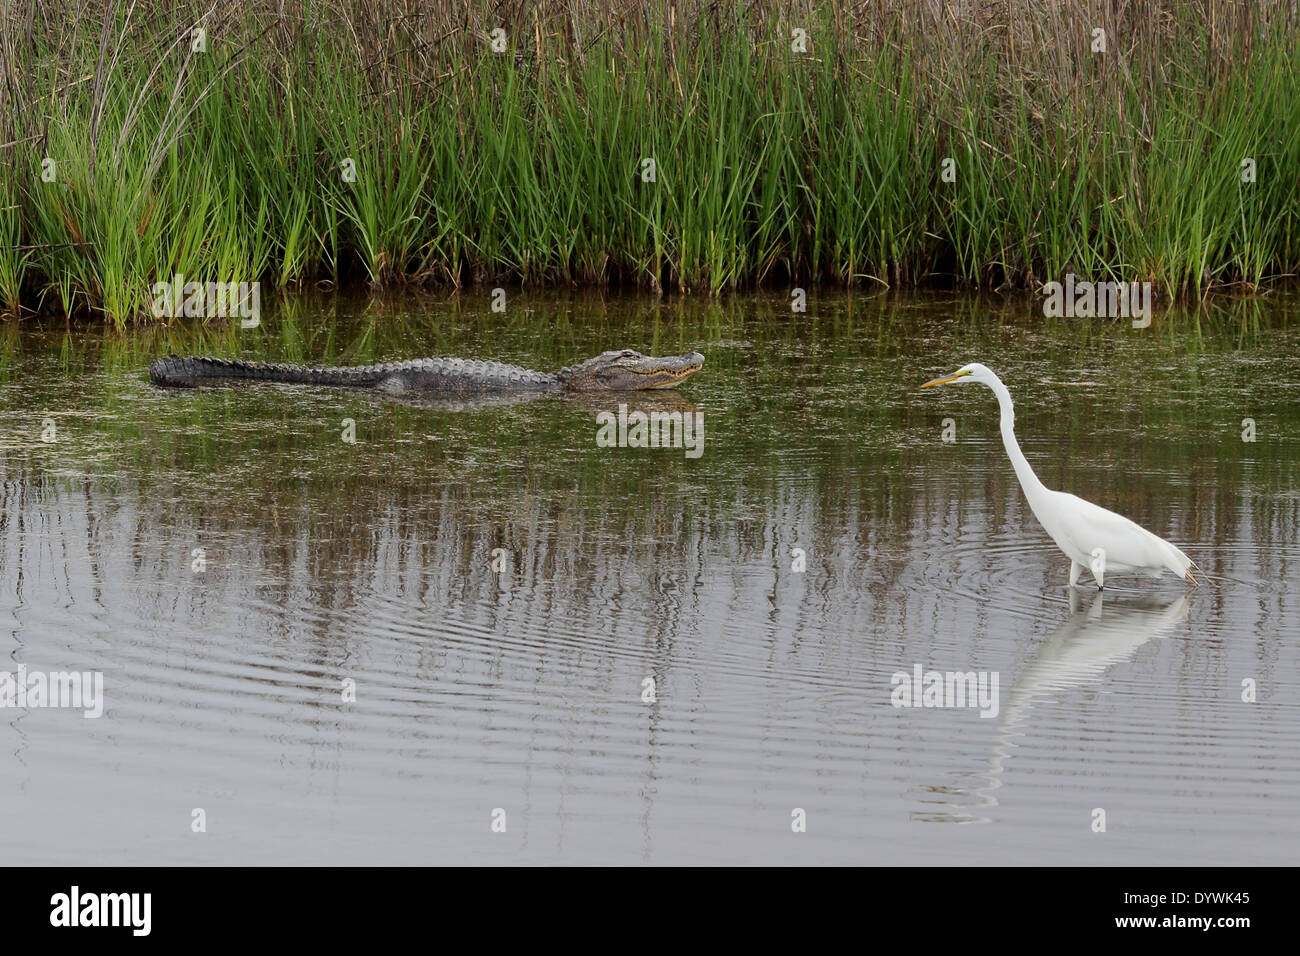 An American Alligator and Great Egret warily coexist in a coastal marsh. Stock Photo